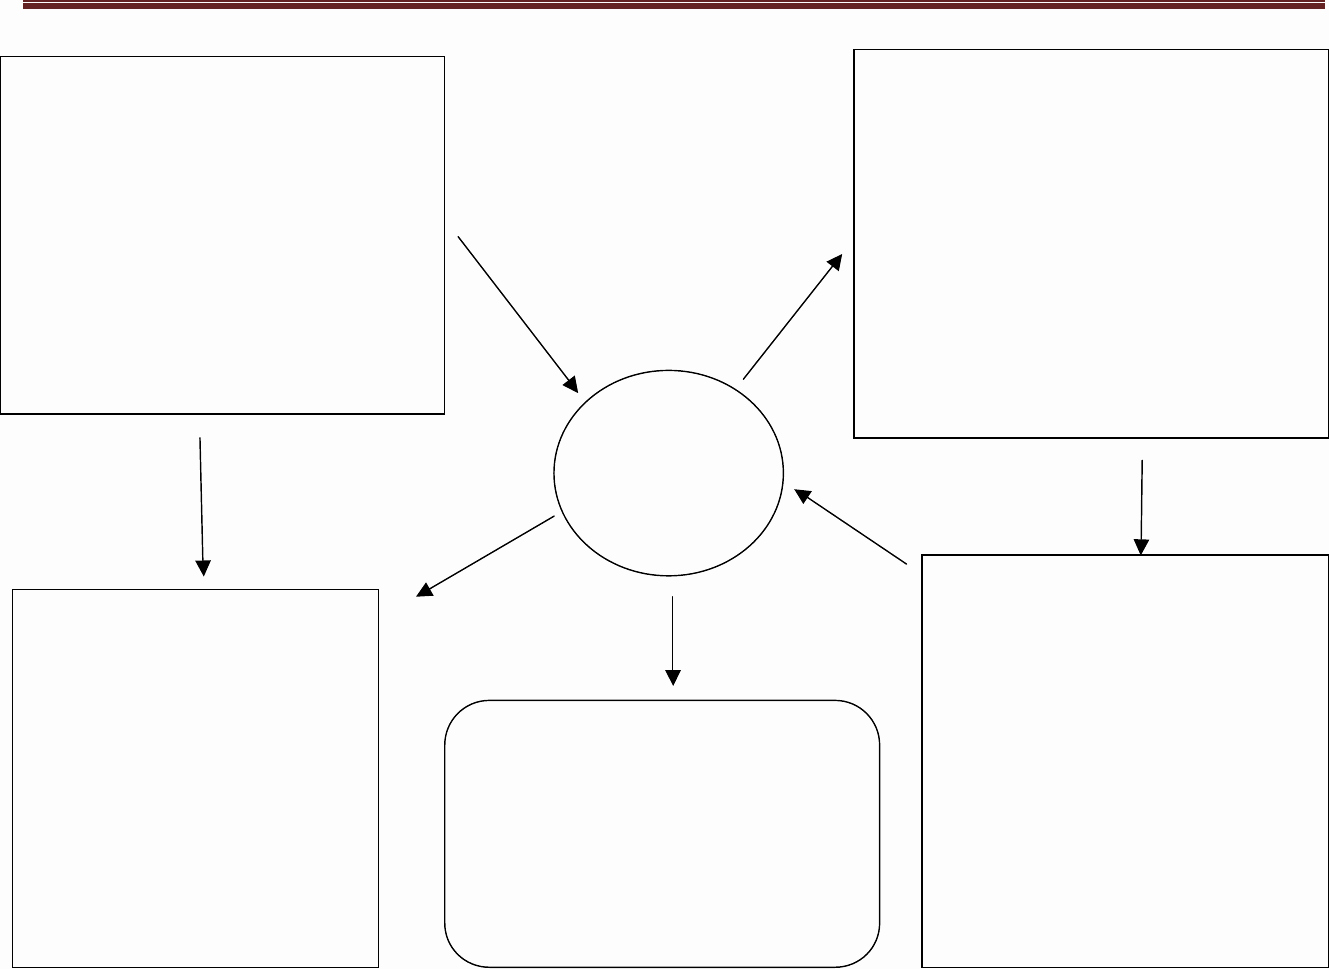 Concept Map Template In Word and Pdf formats